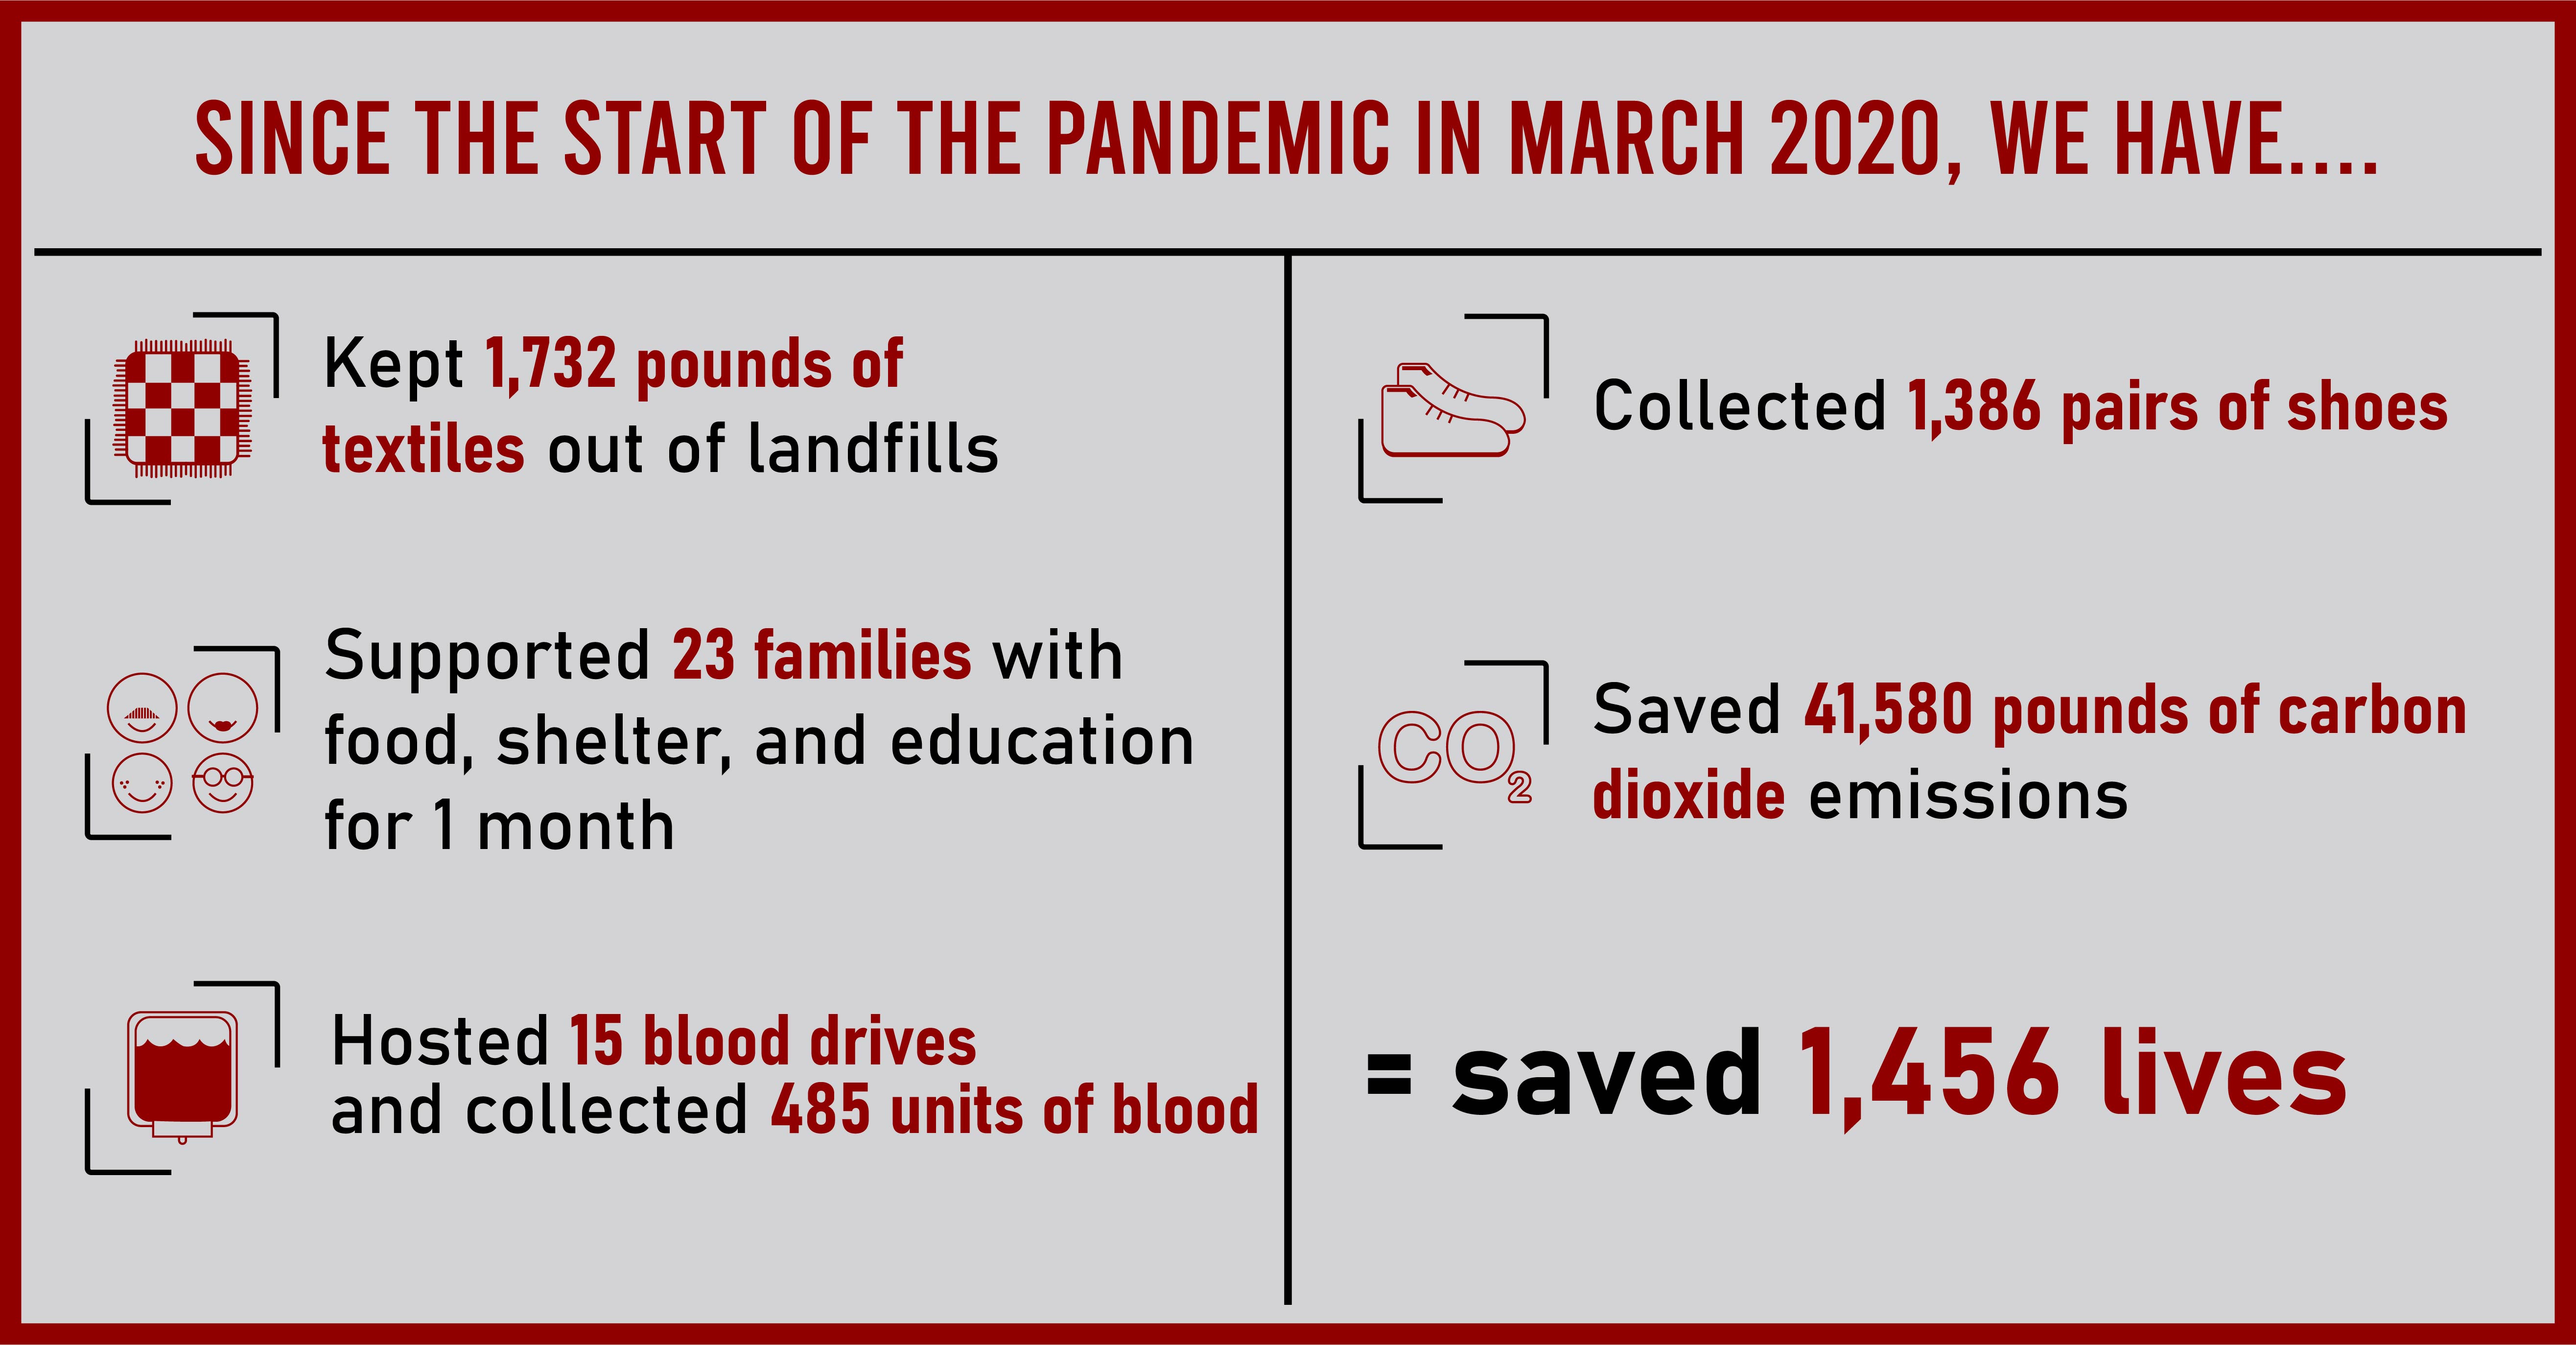 Since the start of the pandemic in March 2020, we have...  Hosted 15 blood drives and collected 485 units of blood = saved 1,456 lives. Collected 1,386 pairs of shoes. Supported 23 families with food, shelter, and education for 1 month. Saved 41,580 pounds of carbon dioxide emissions. Kept 1,732 pounds of textiles out of landfills.